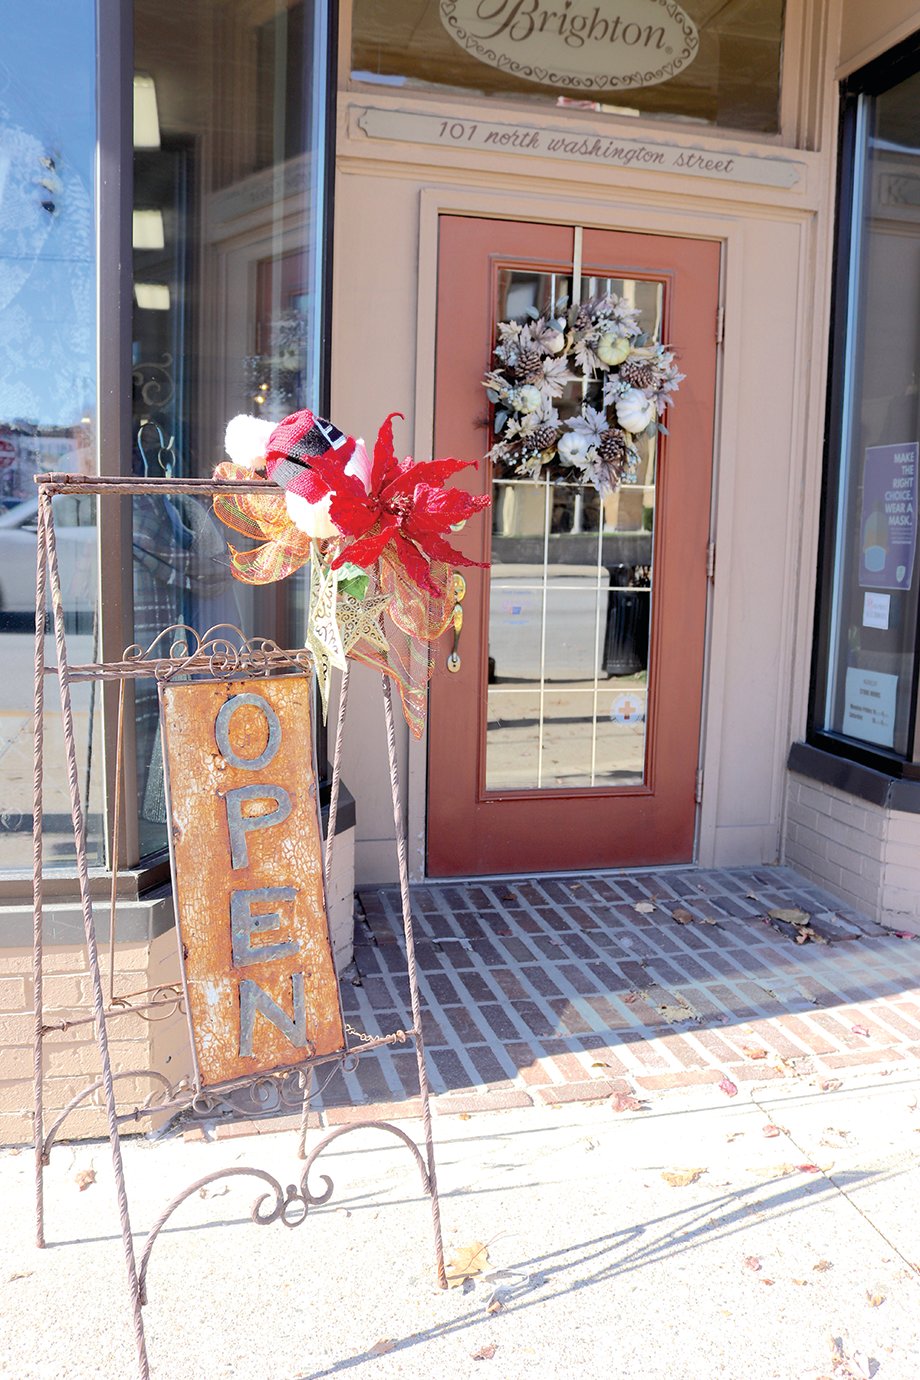 The entrance to Heathcliff on Washington Street is appropriately adorned Friday for downtown holiday open houses which extend into today through 7 p.m. For a full list of holiday open houses, visit www.crawfordsvillemainstreet.com.